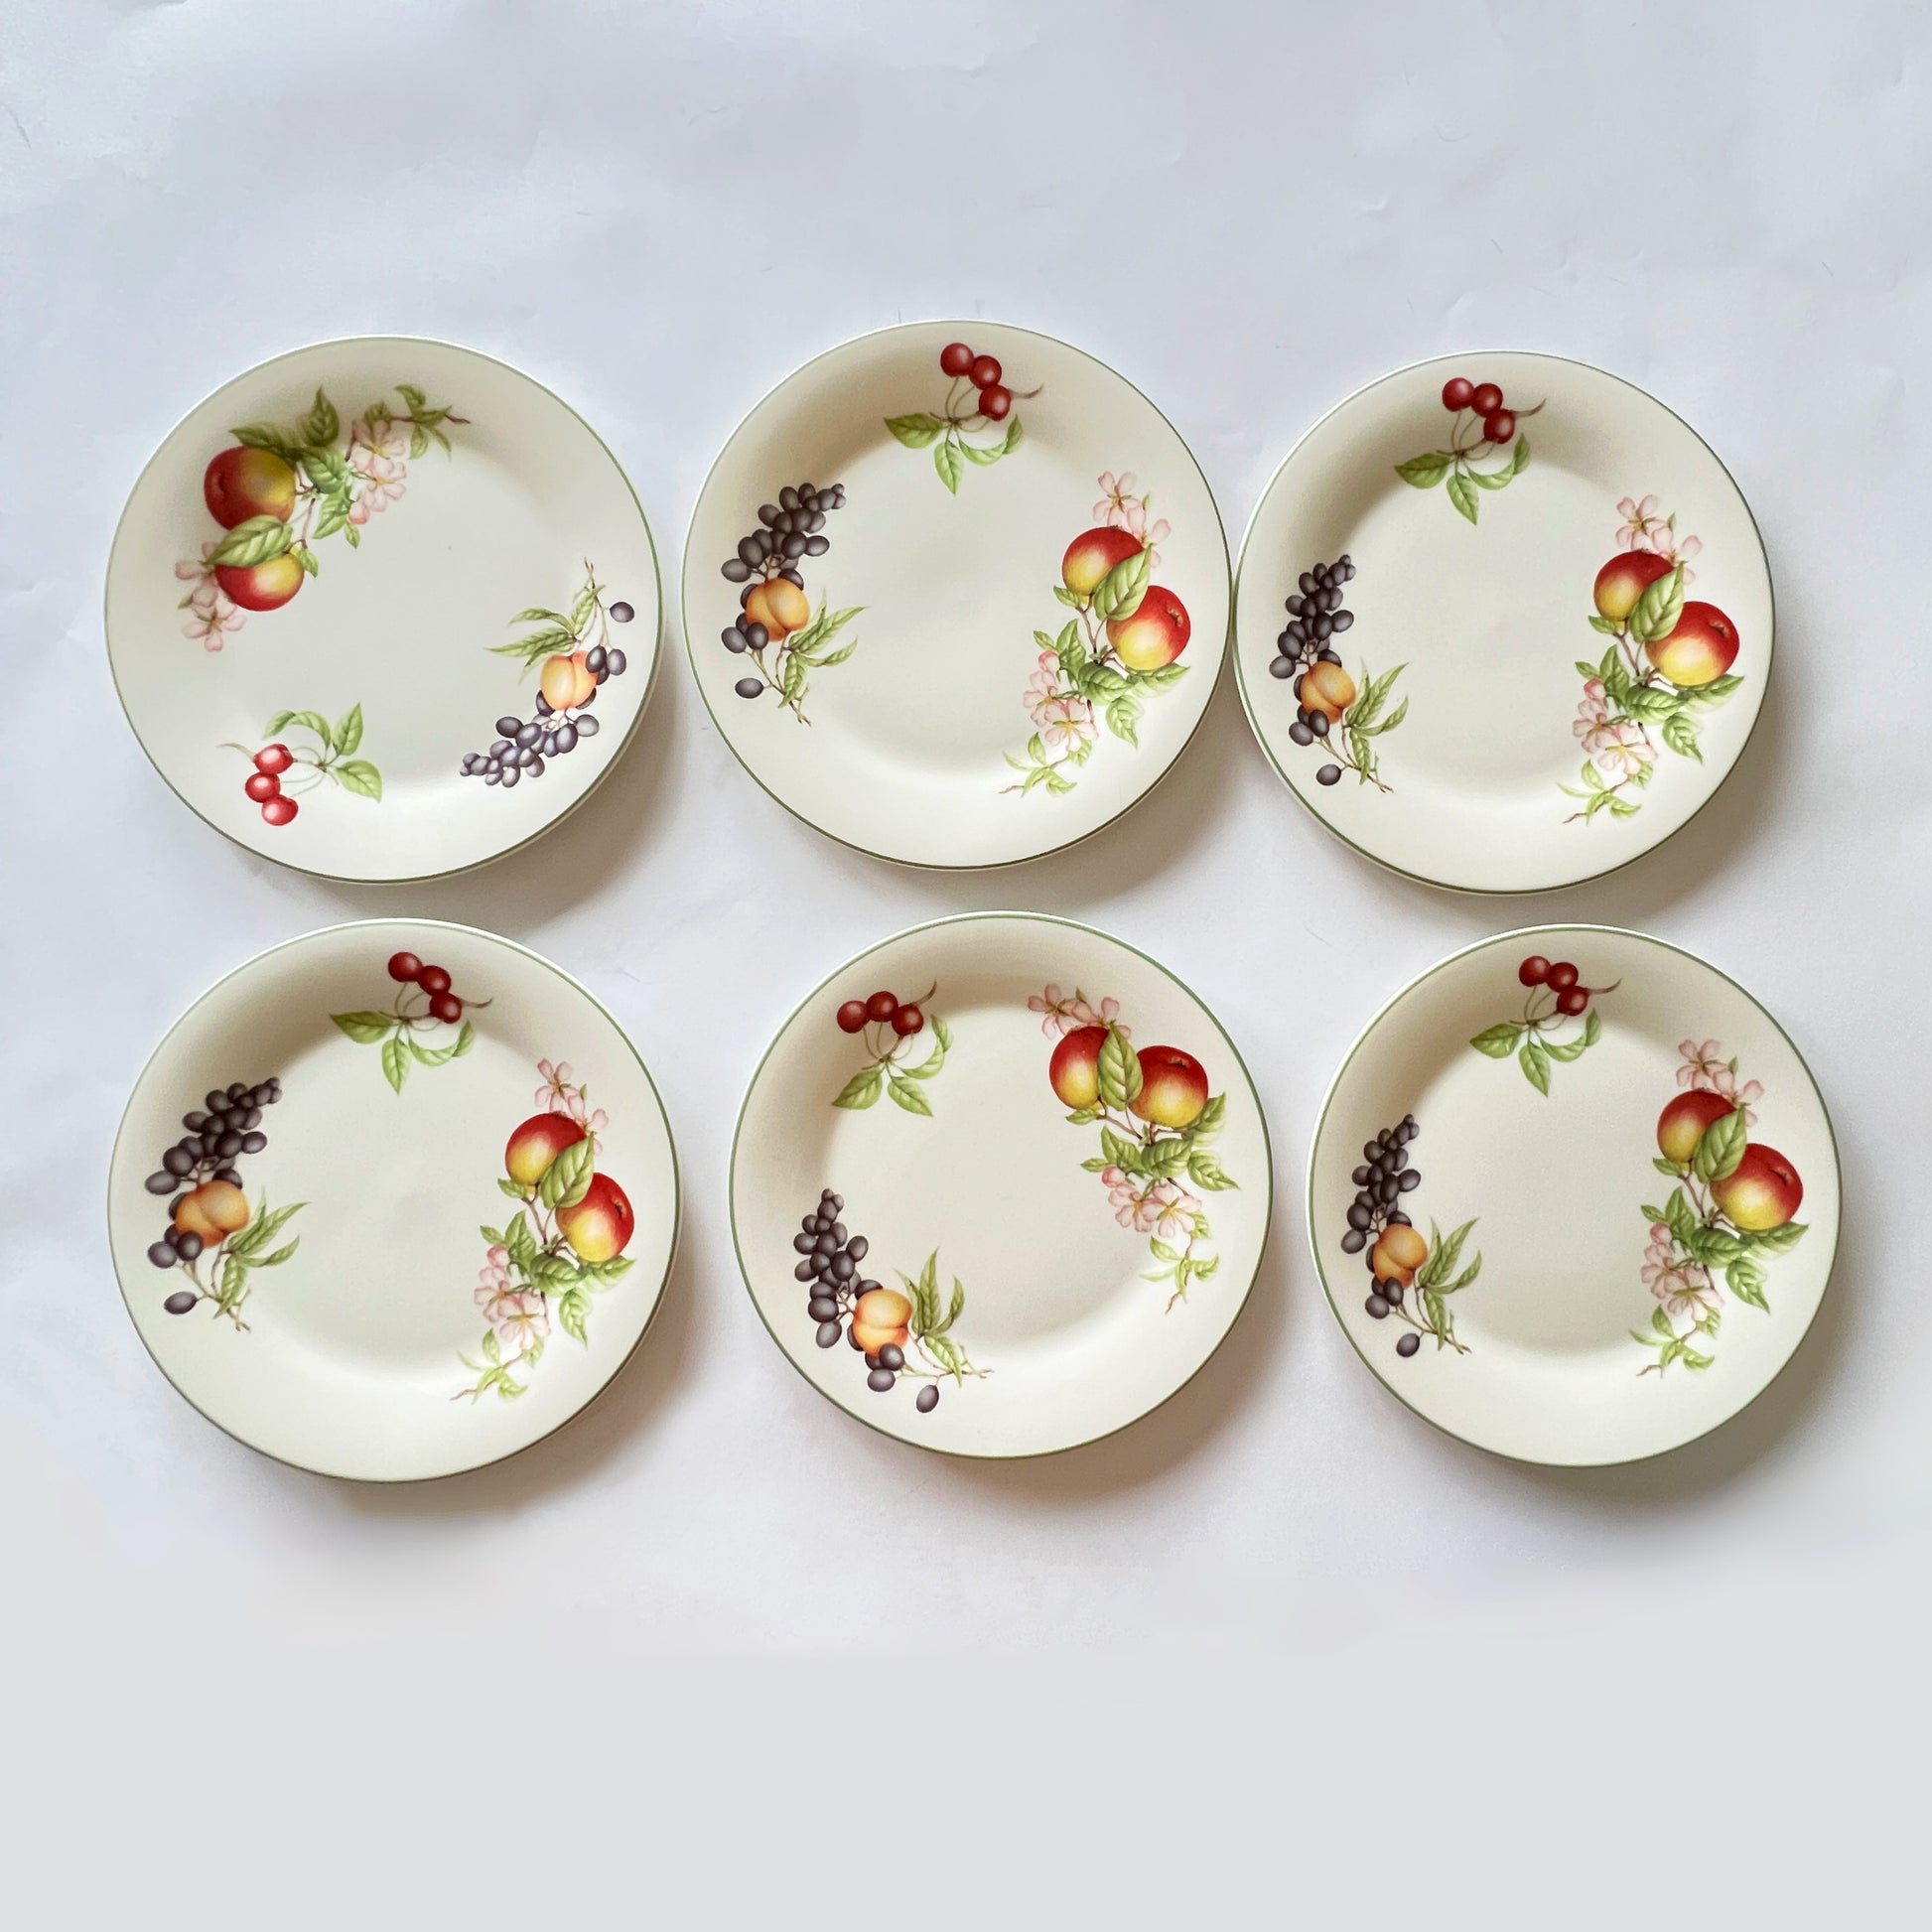 Asbury-China-Plates.Set-for-6-People-by-Royal-Doulton.-Shop-eBargainsAndDeals.com